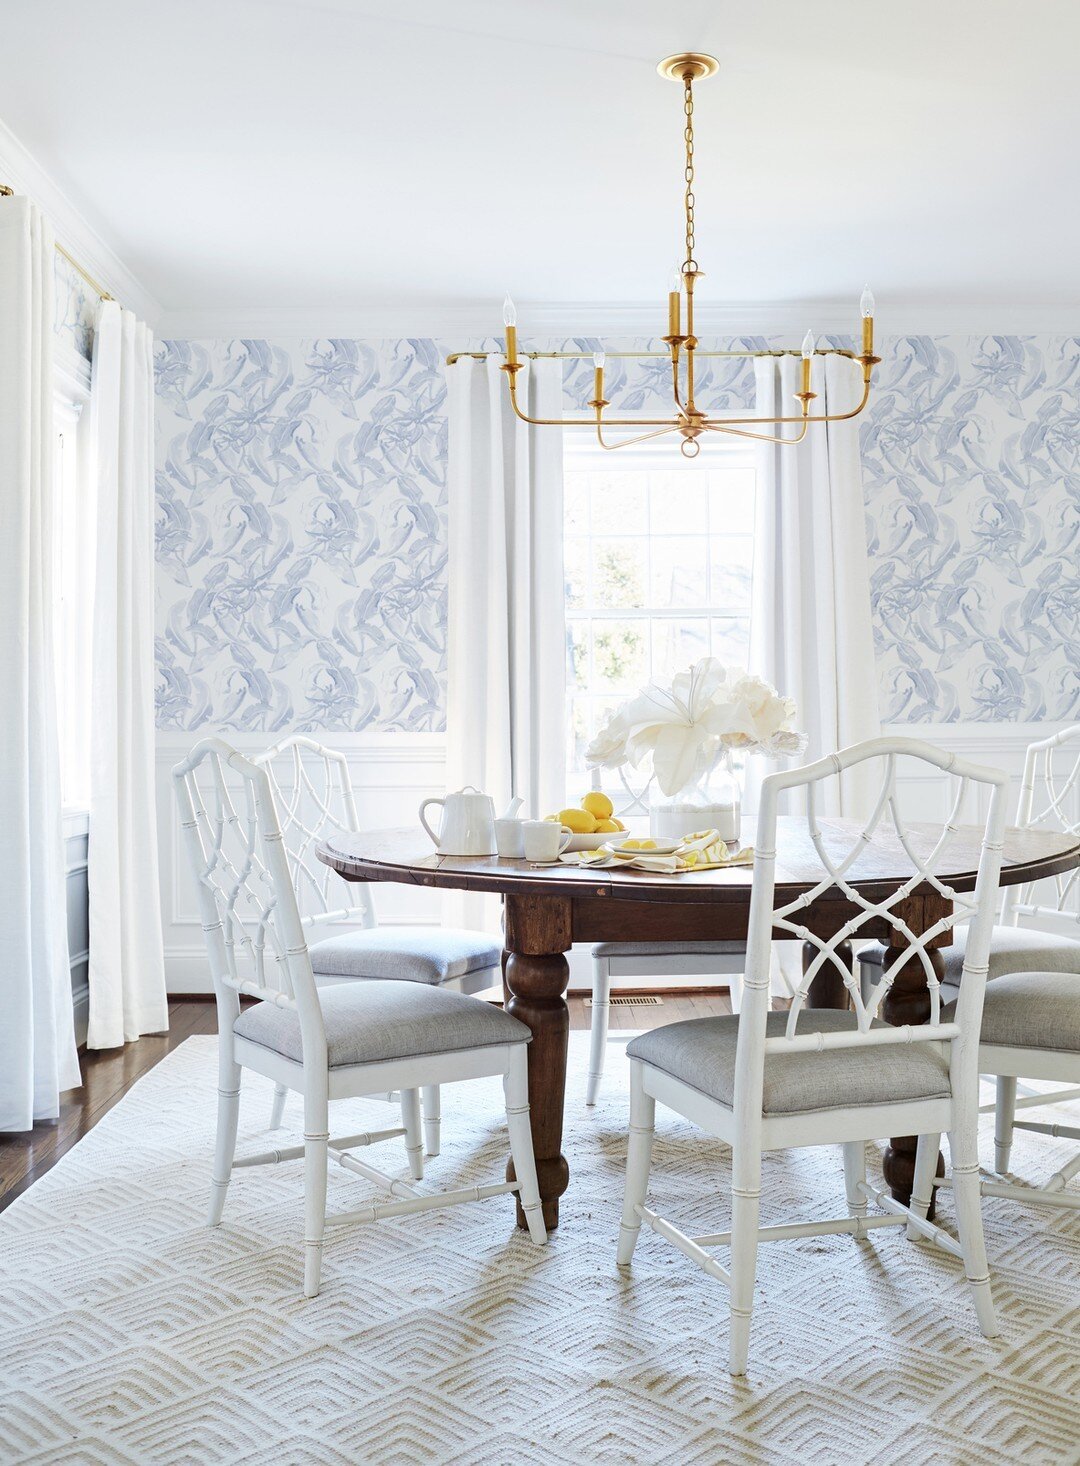 I love the mix in this Dining Room. What designers know is how to layer all the patterns and finishes to create an inviting space that makes you want to linger longer. Painted chairs with the wood table, bright brass chandelier, and of course Stay Wi